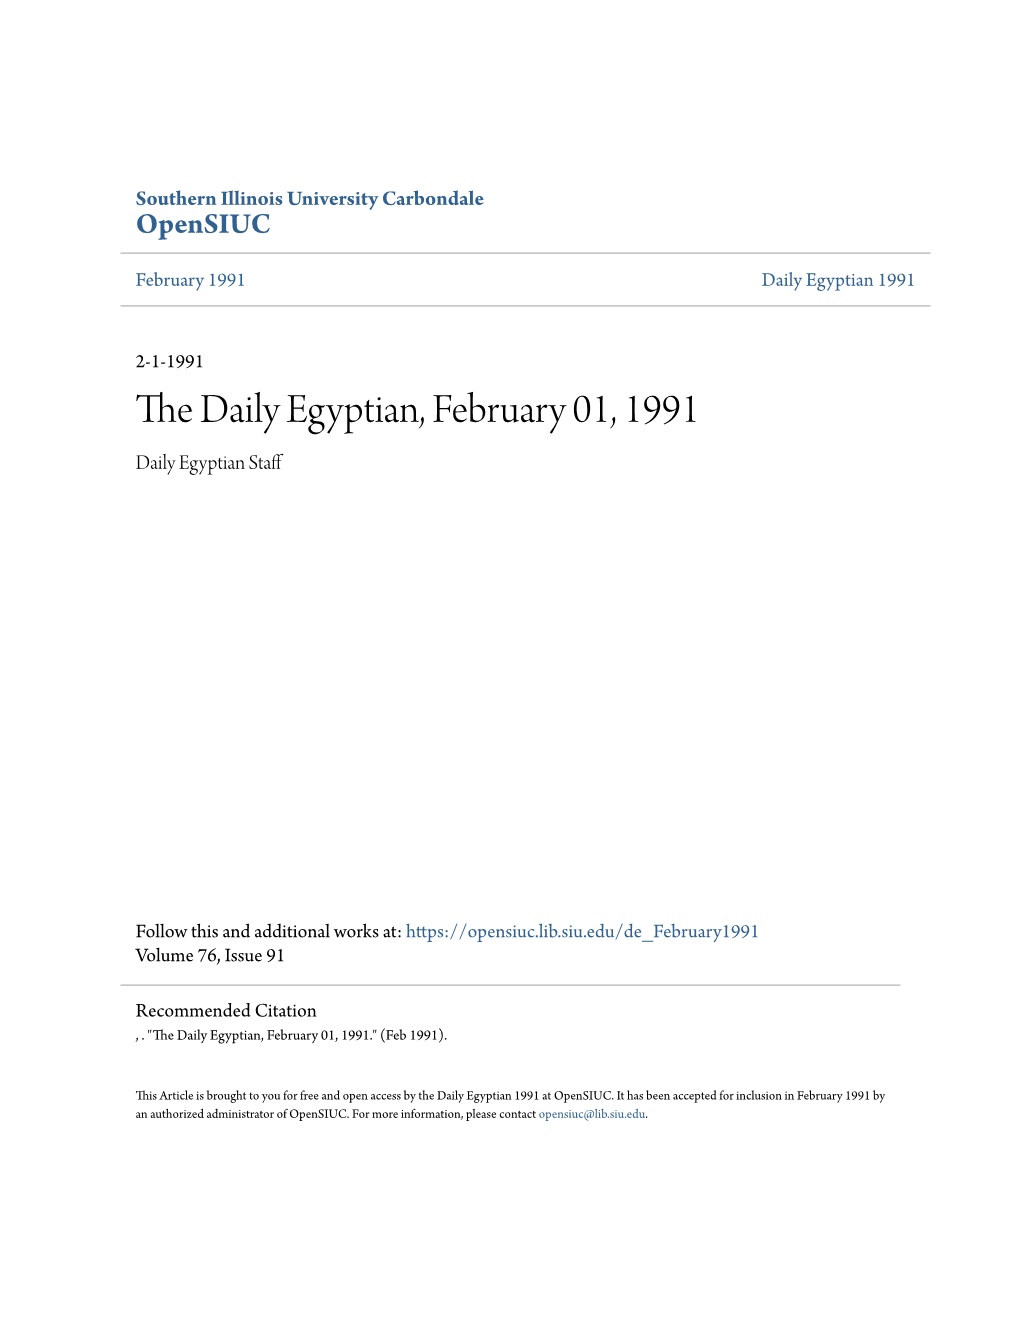 The Daily Egyptian, February 01, 1991